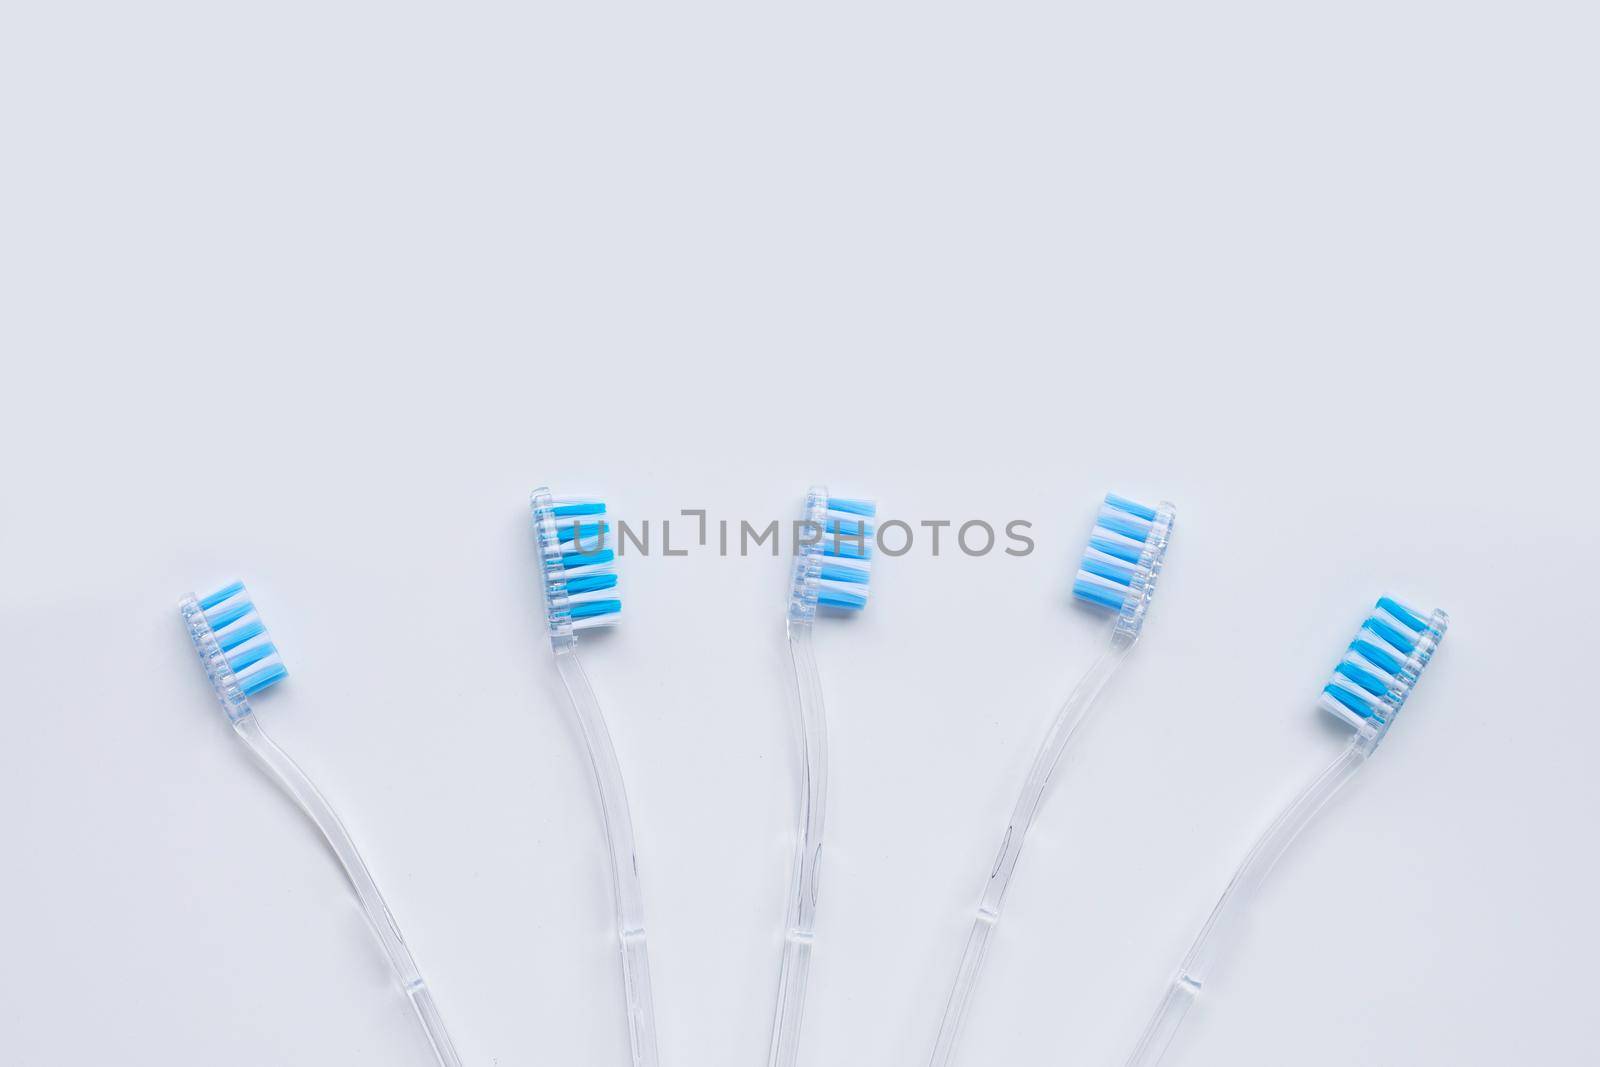 Toothbrushes on white background. Top view